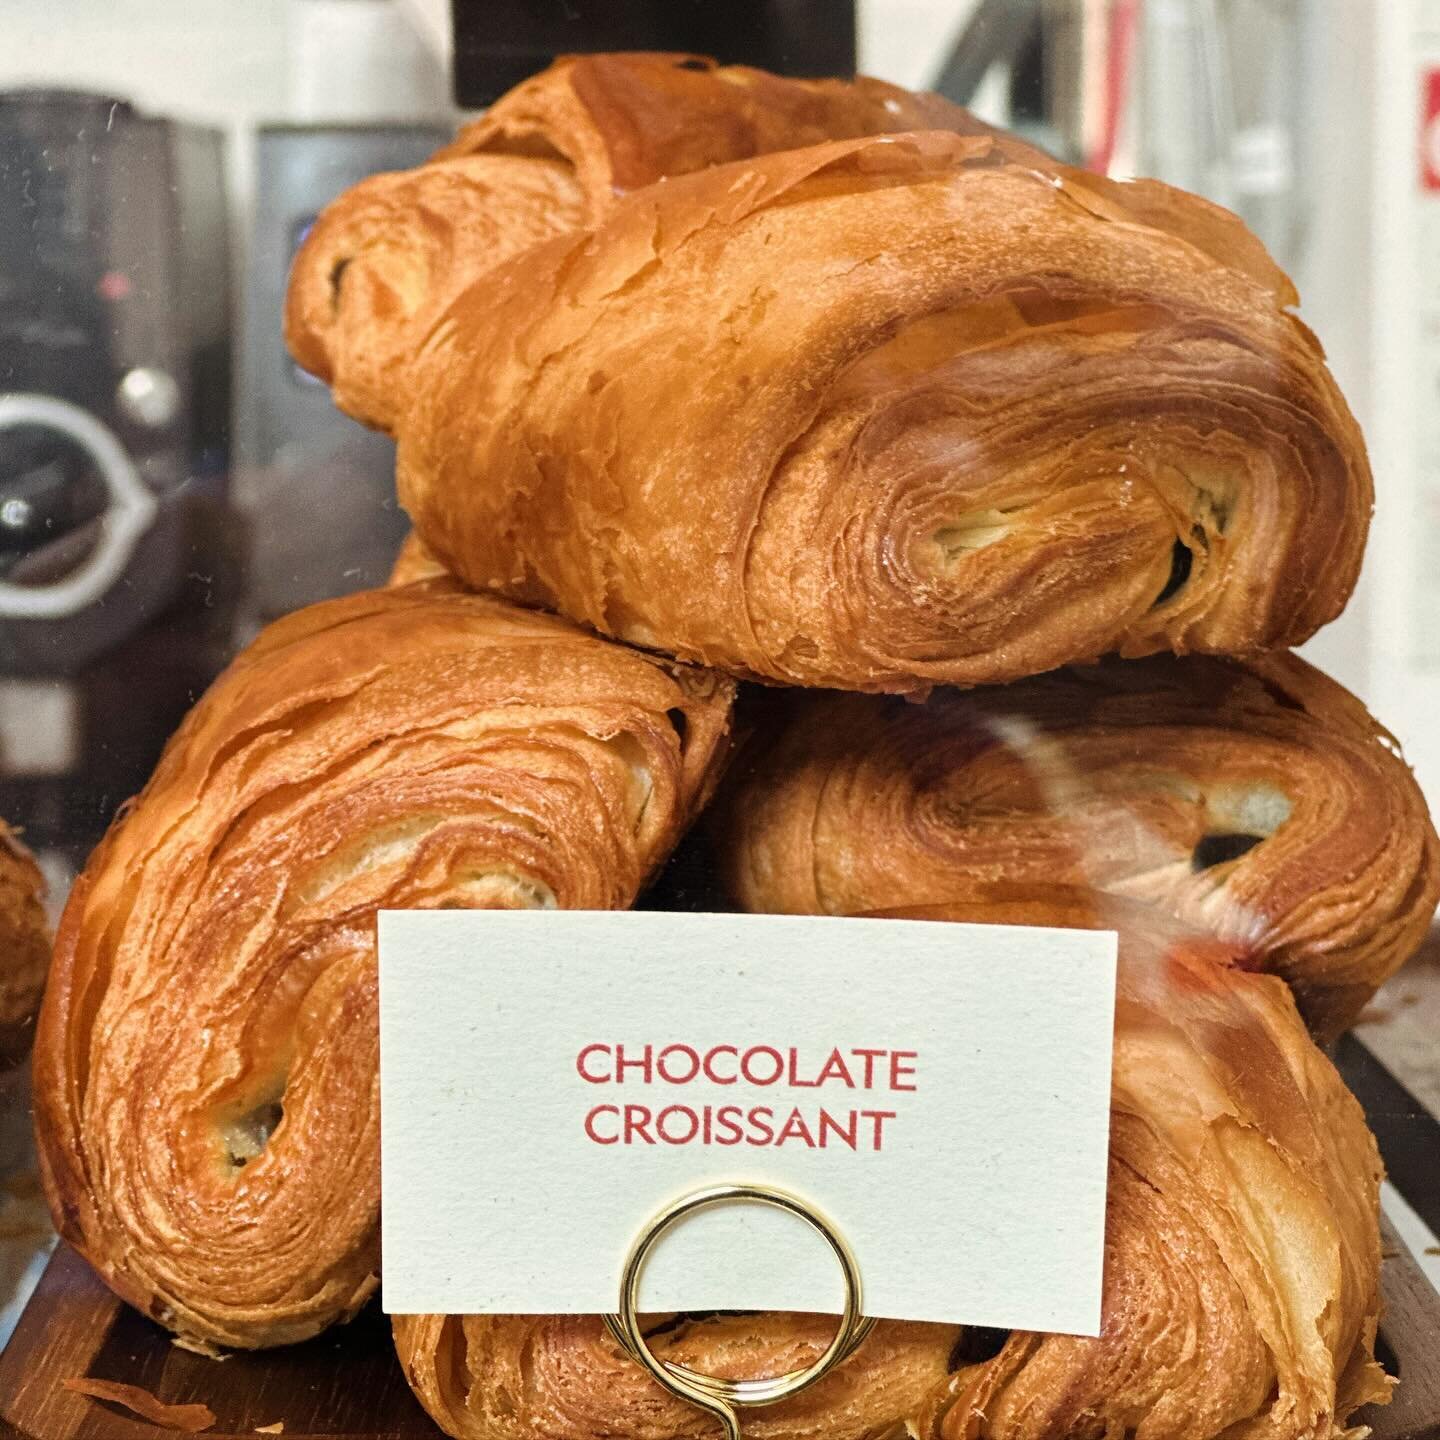 PASTRY 🥐 HAPPY HOUR: Starting today from 4-6pm Monday to Friday all pastries are 50% off til they run out! 

Our current selection includes classic croissants &amp; scones from @balthazarbakery_nj as well as other goodies from @colsonpatisserie incl